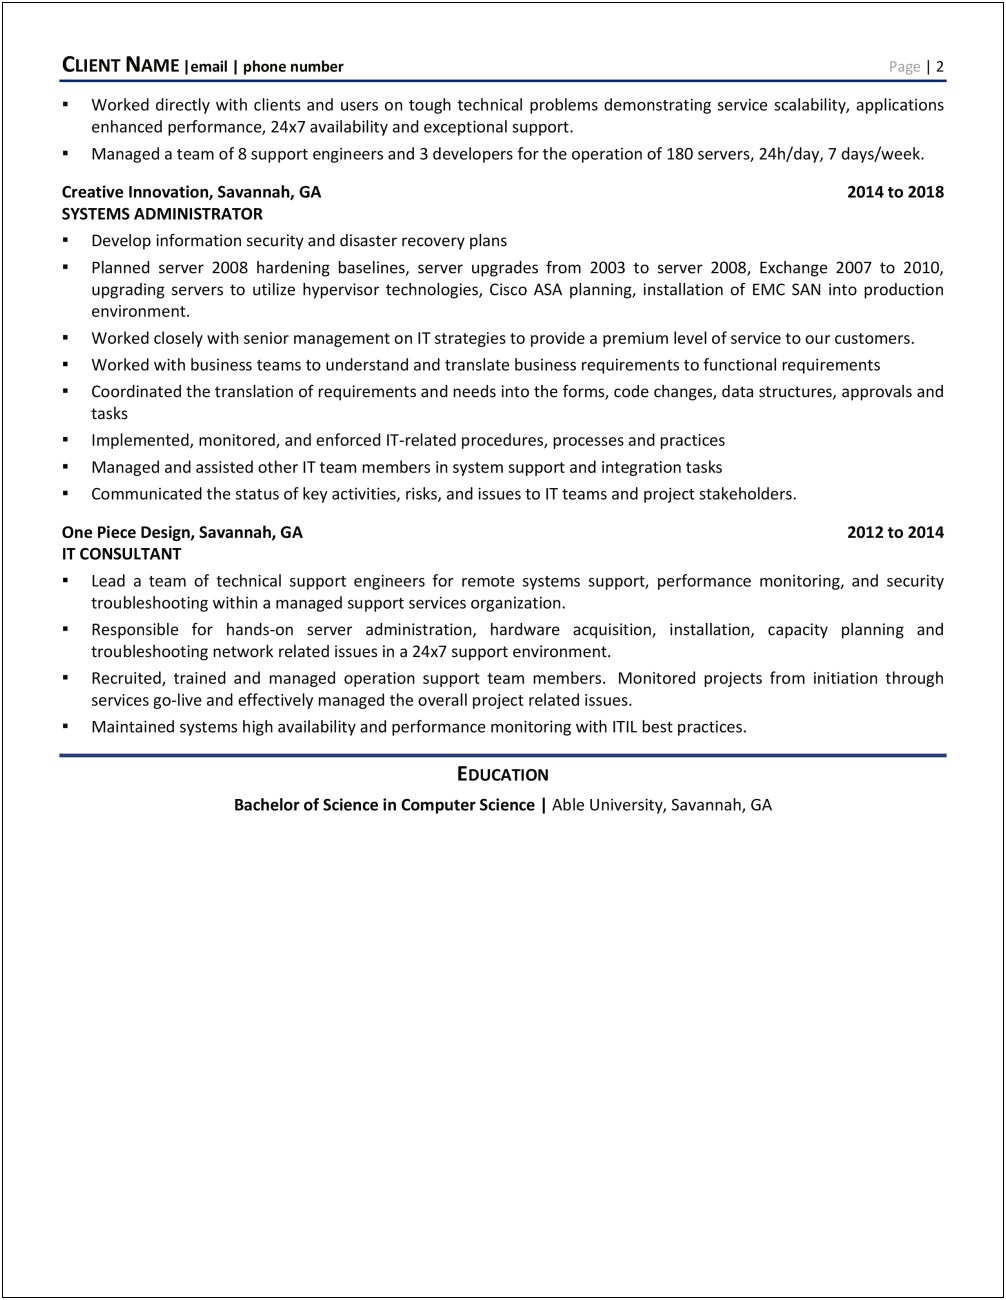 Resume Summary Paragraphs For Engineering Team Lead Andmanager